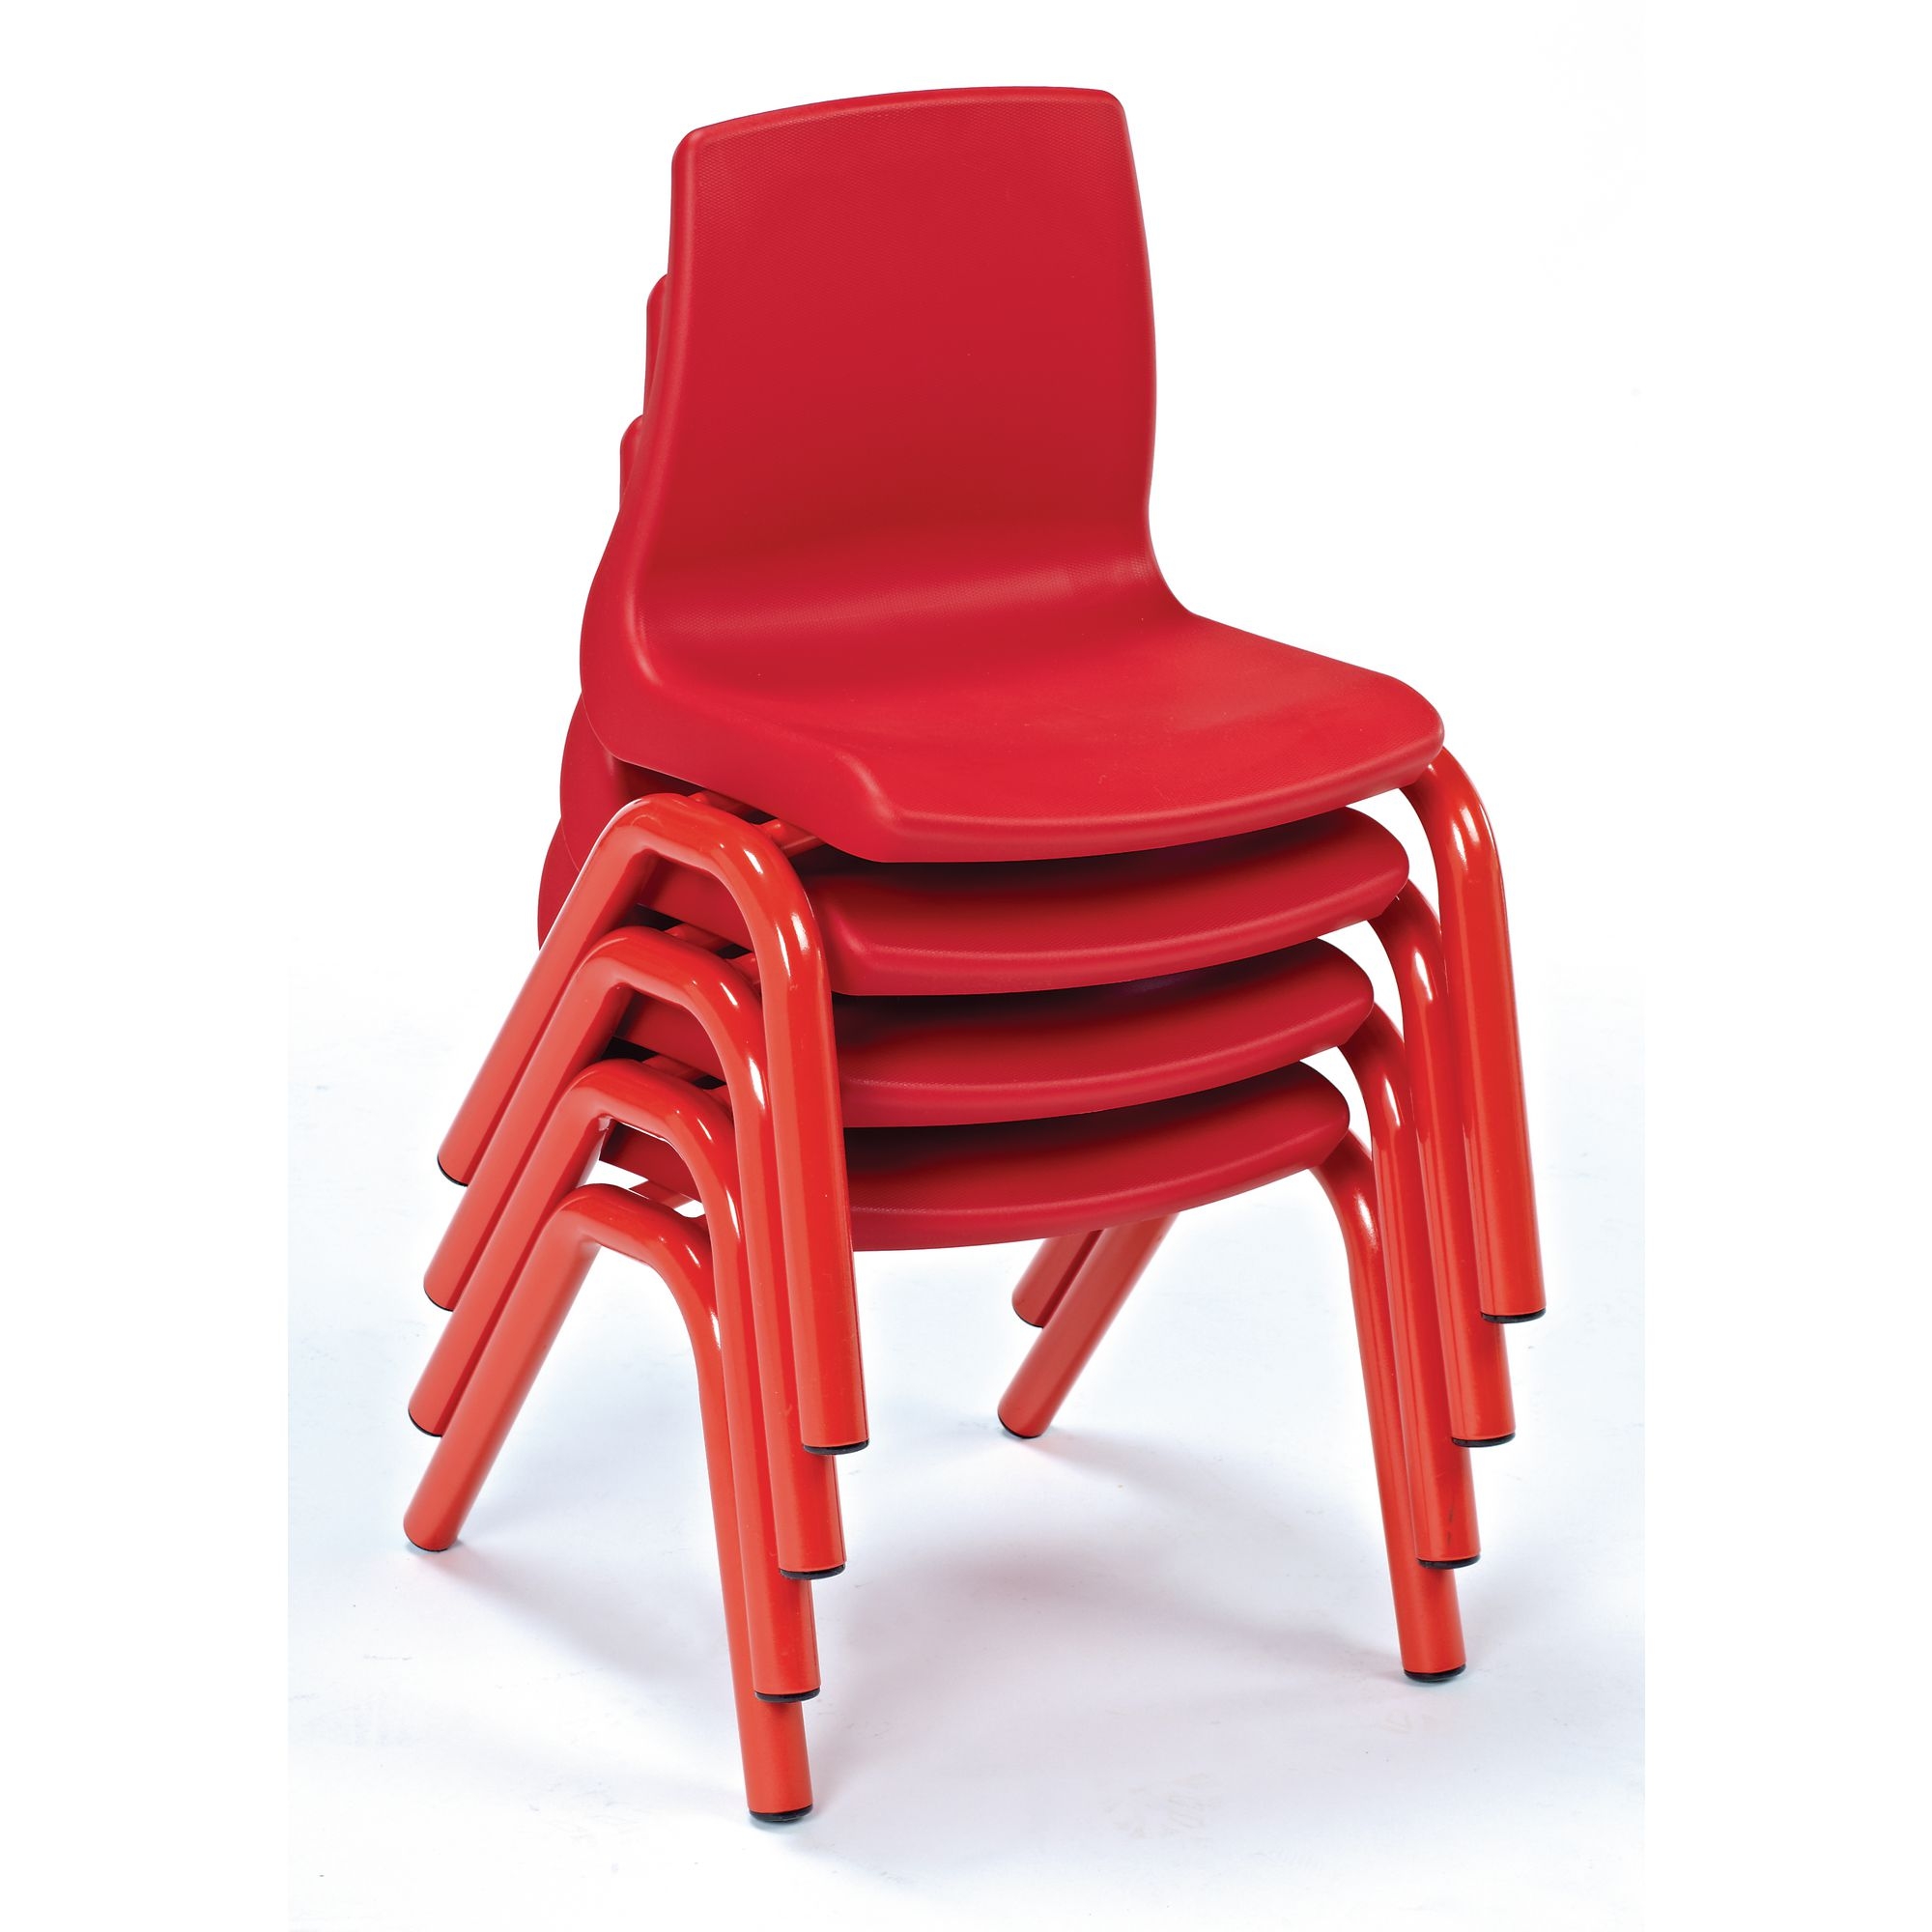 Harlequin Chairs - Size B - Seat height: 310mm - Red